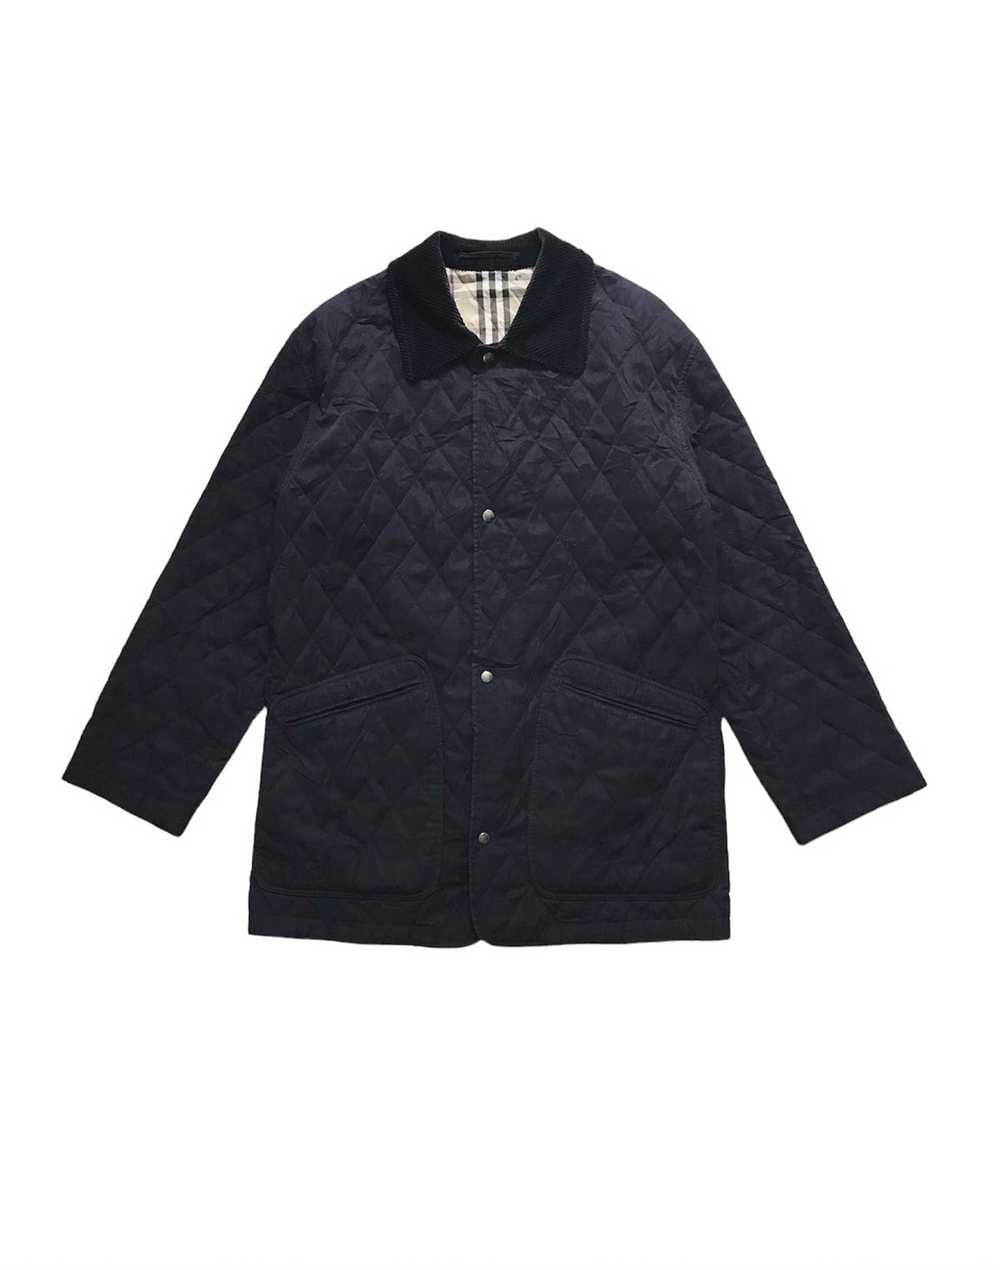 Burberry Burberry Diamond Quilted Jacket - image 1